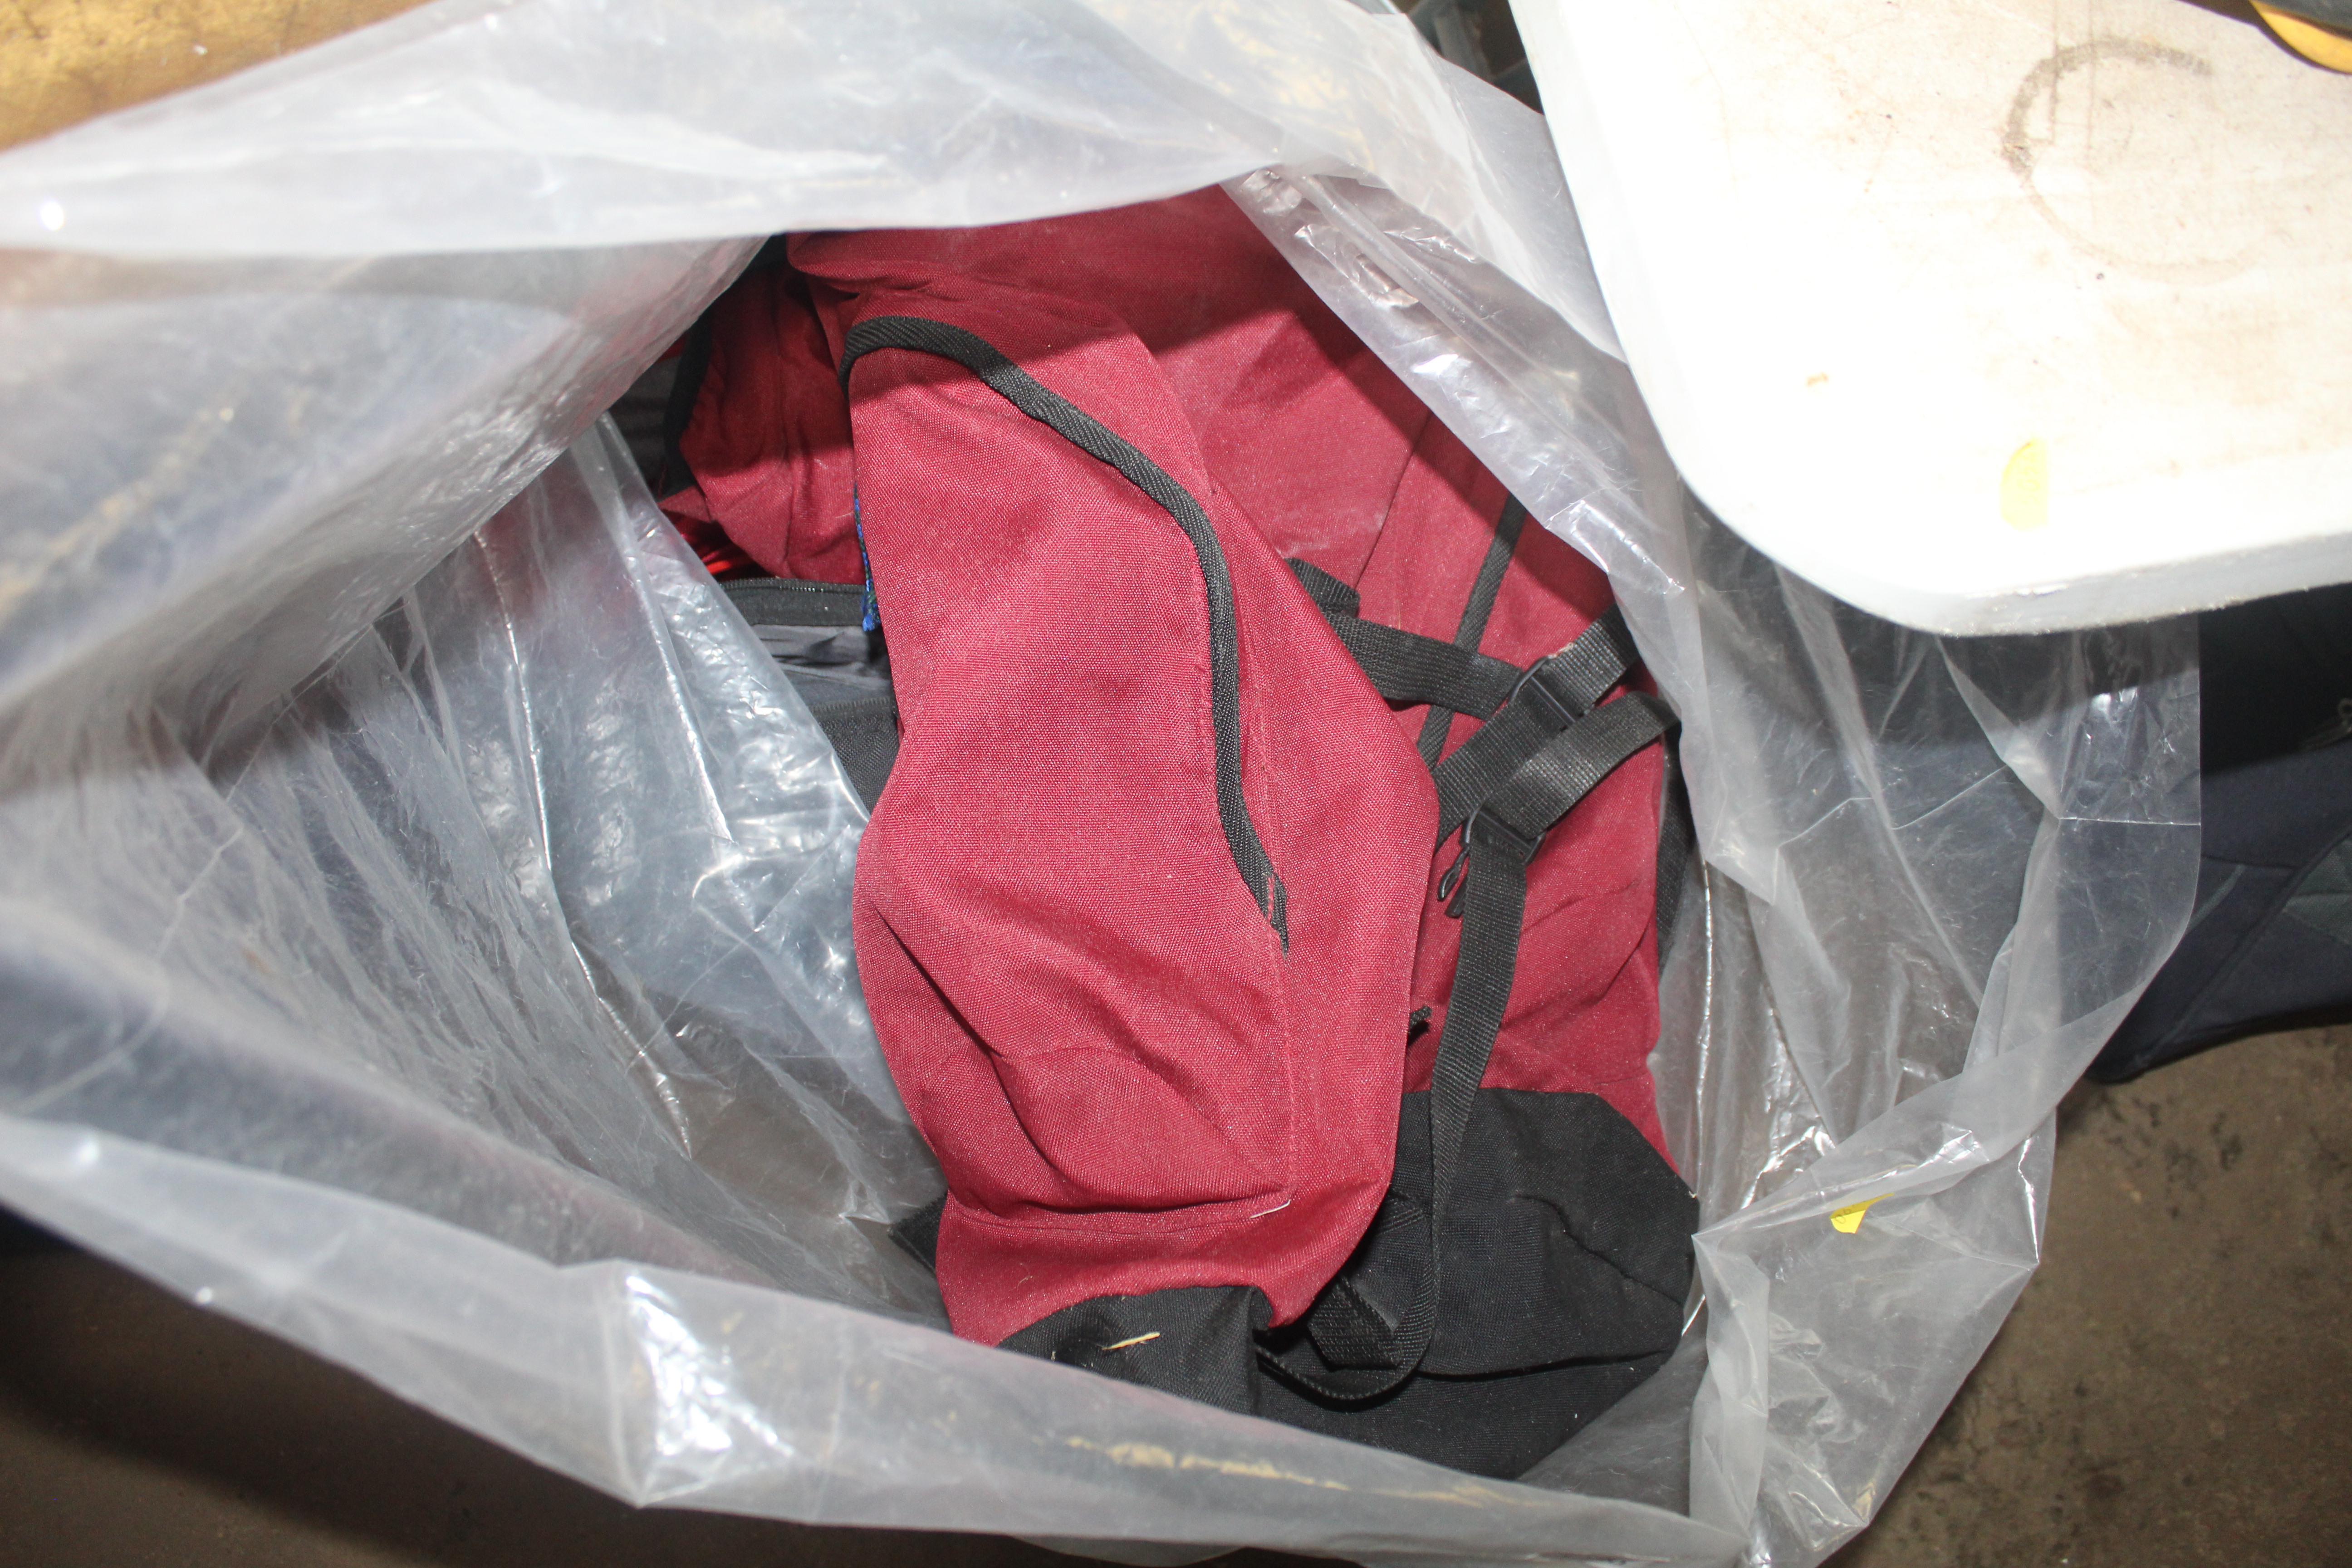 A bag containing various holdalls, bags etc. - Image 2 of 2